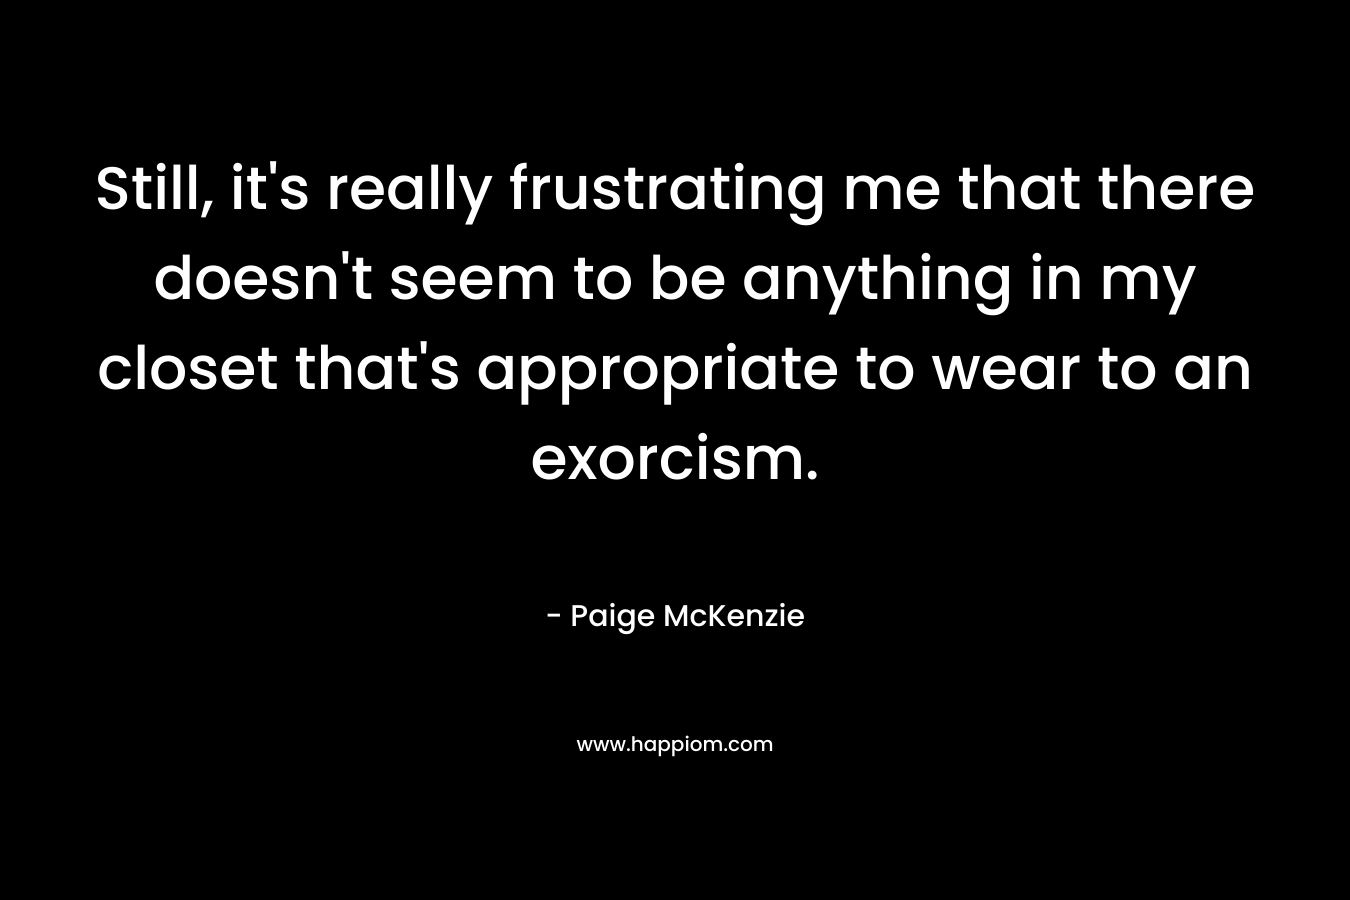 Still, it’s really frustrating me that there doesn’t seem to be anything in my closet that’s appropriate to wear to an exorcism. – Paige McKenzie